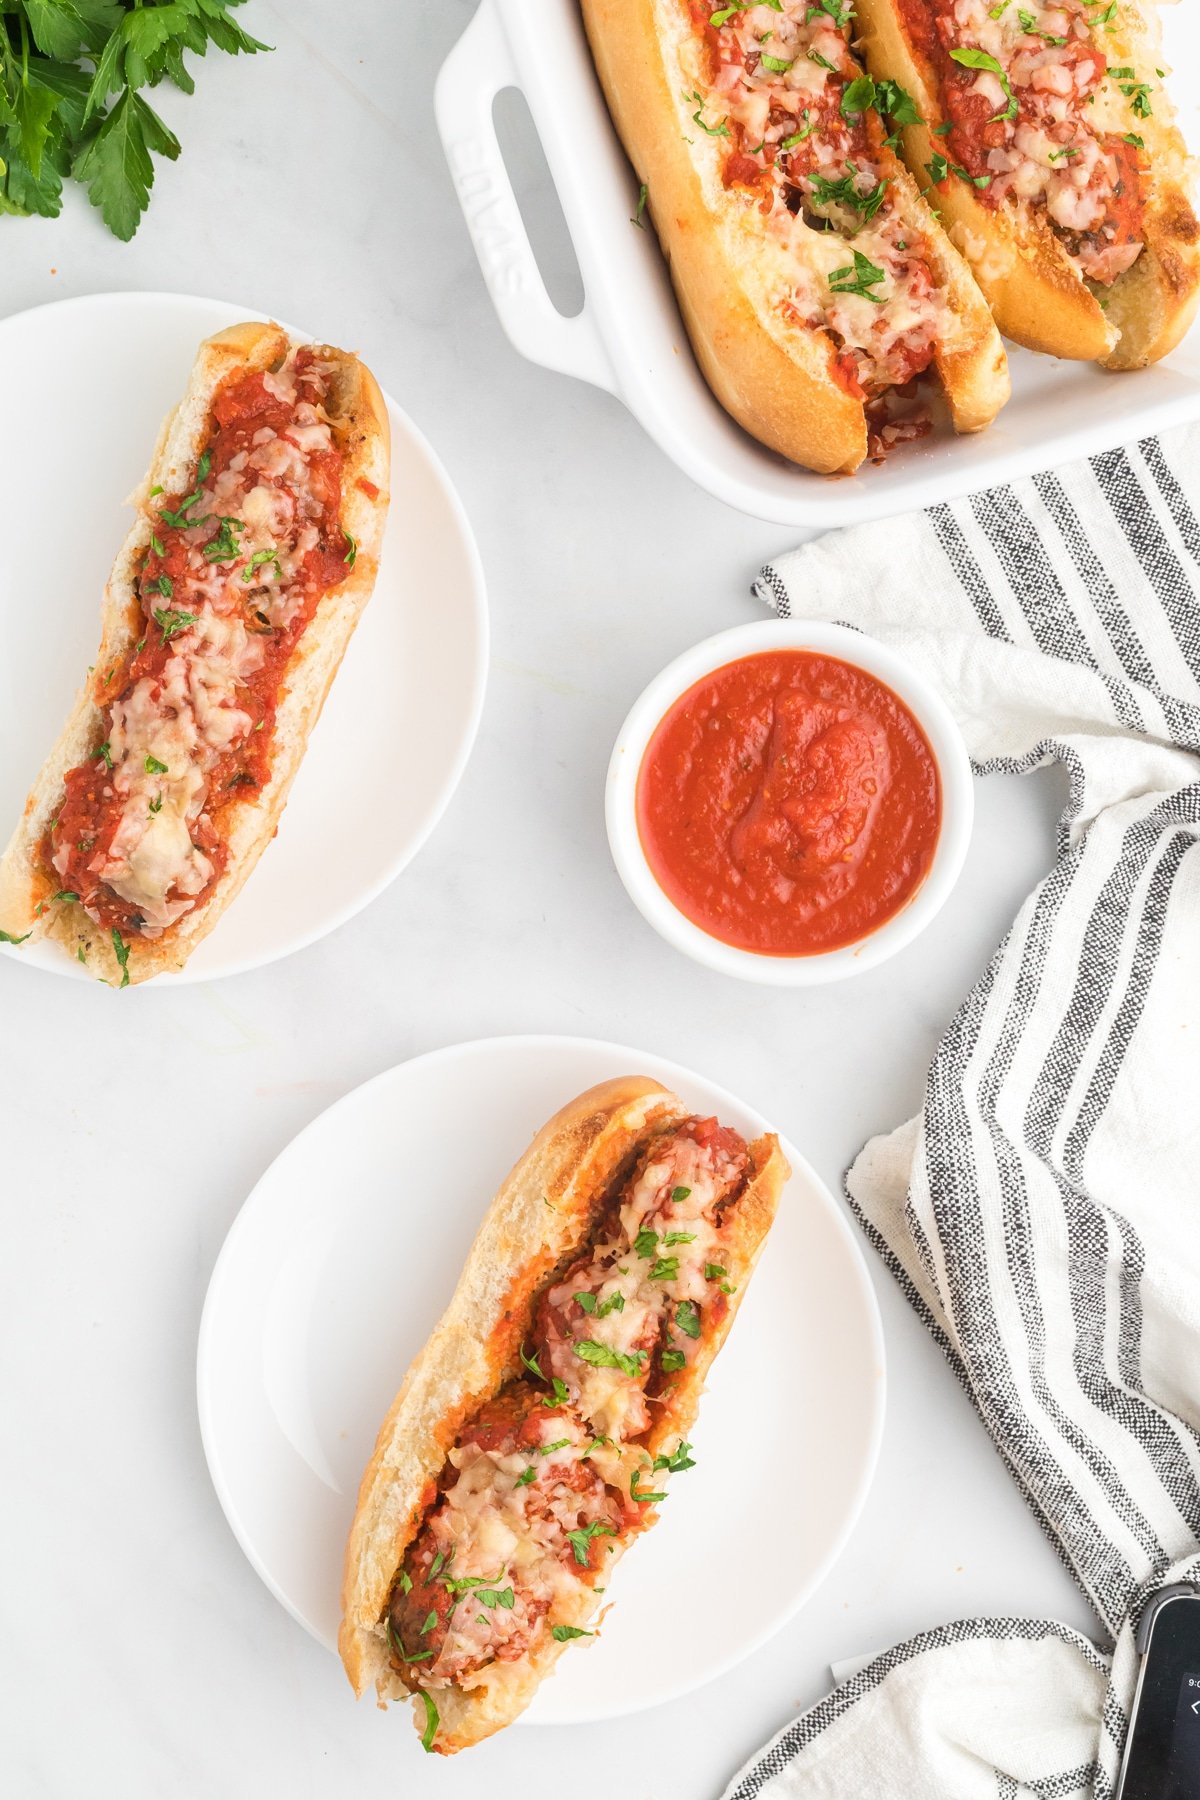 Overhead view of two meatball subs on plates